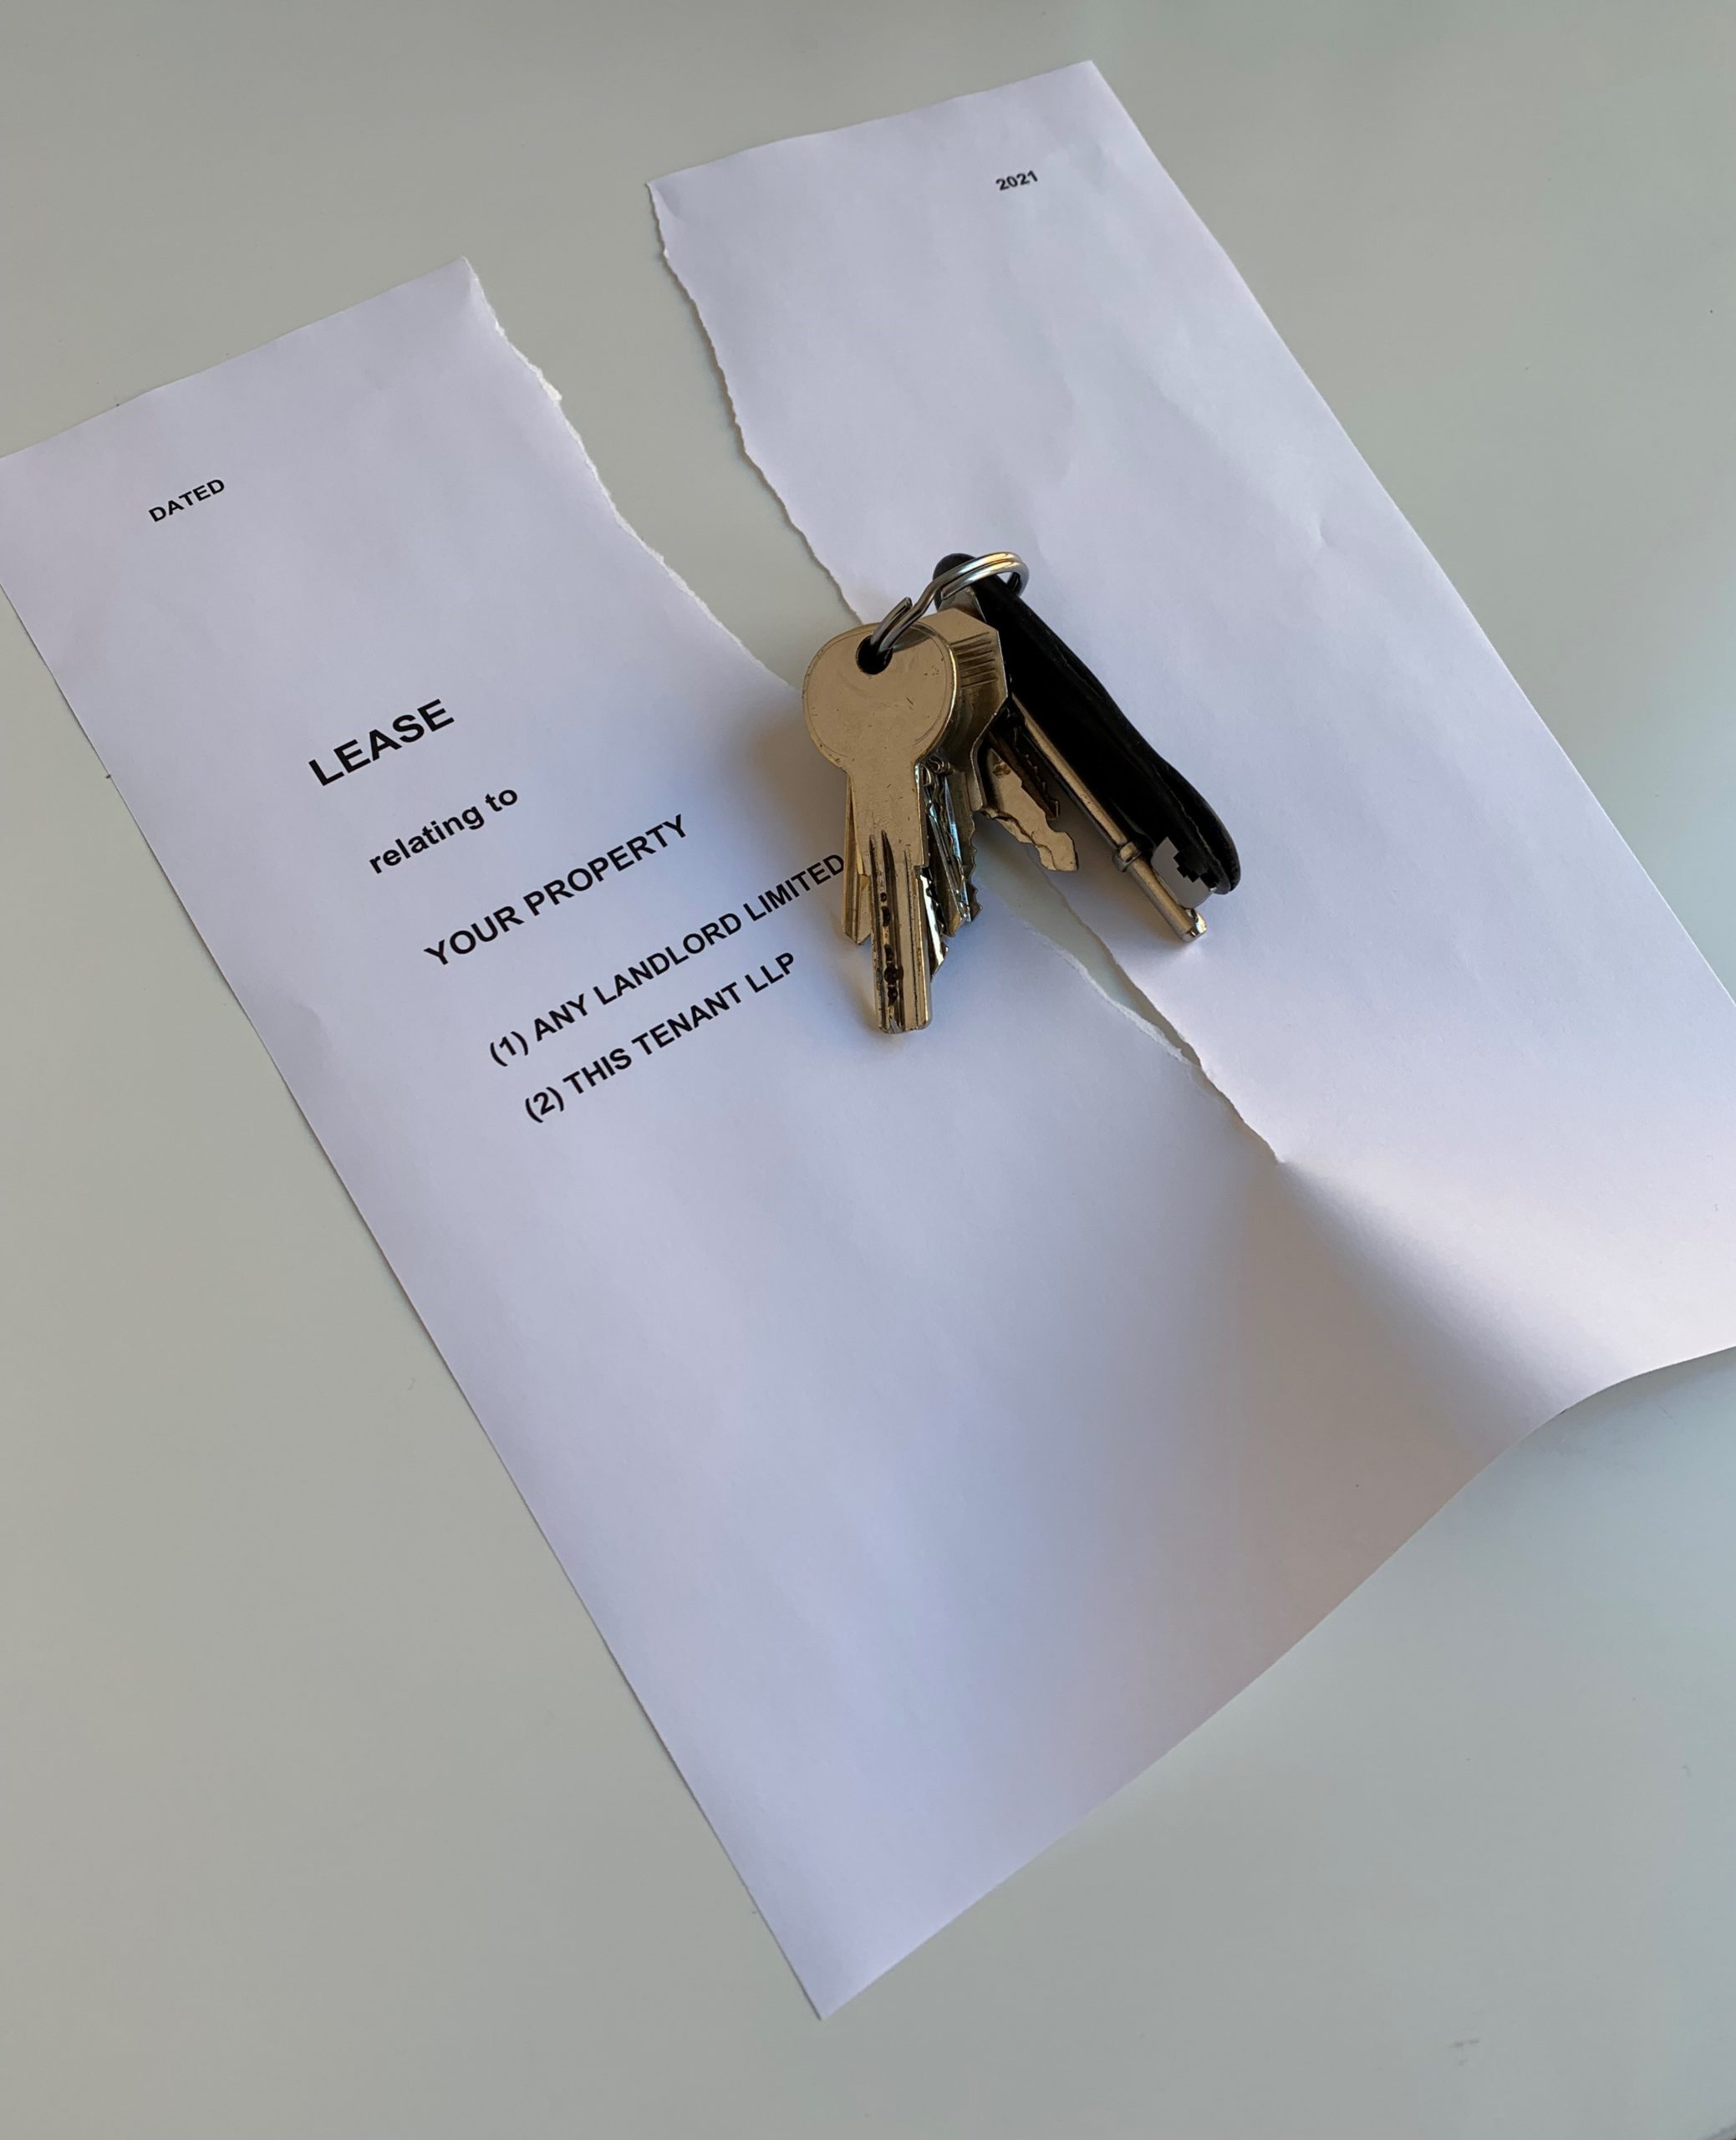 Break clauses from a landlord’s perspective